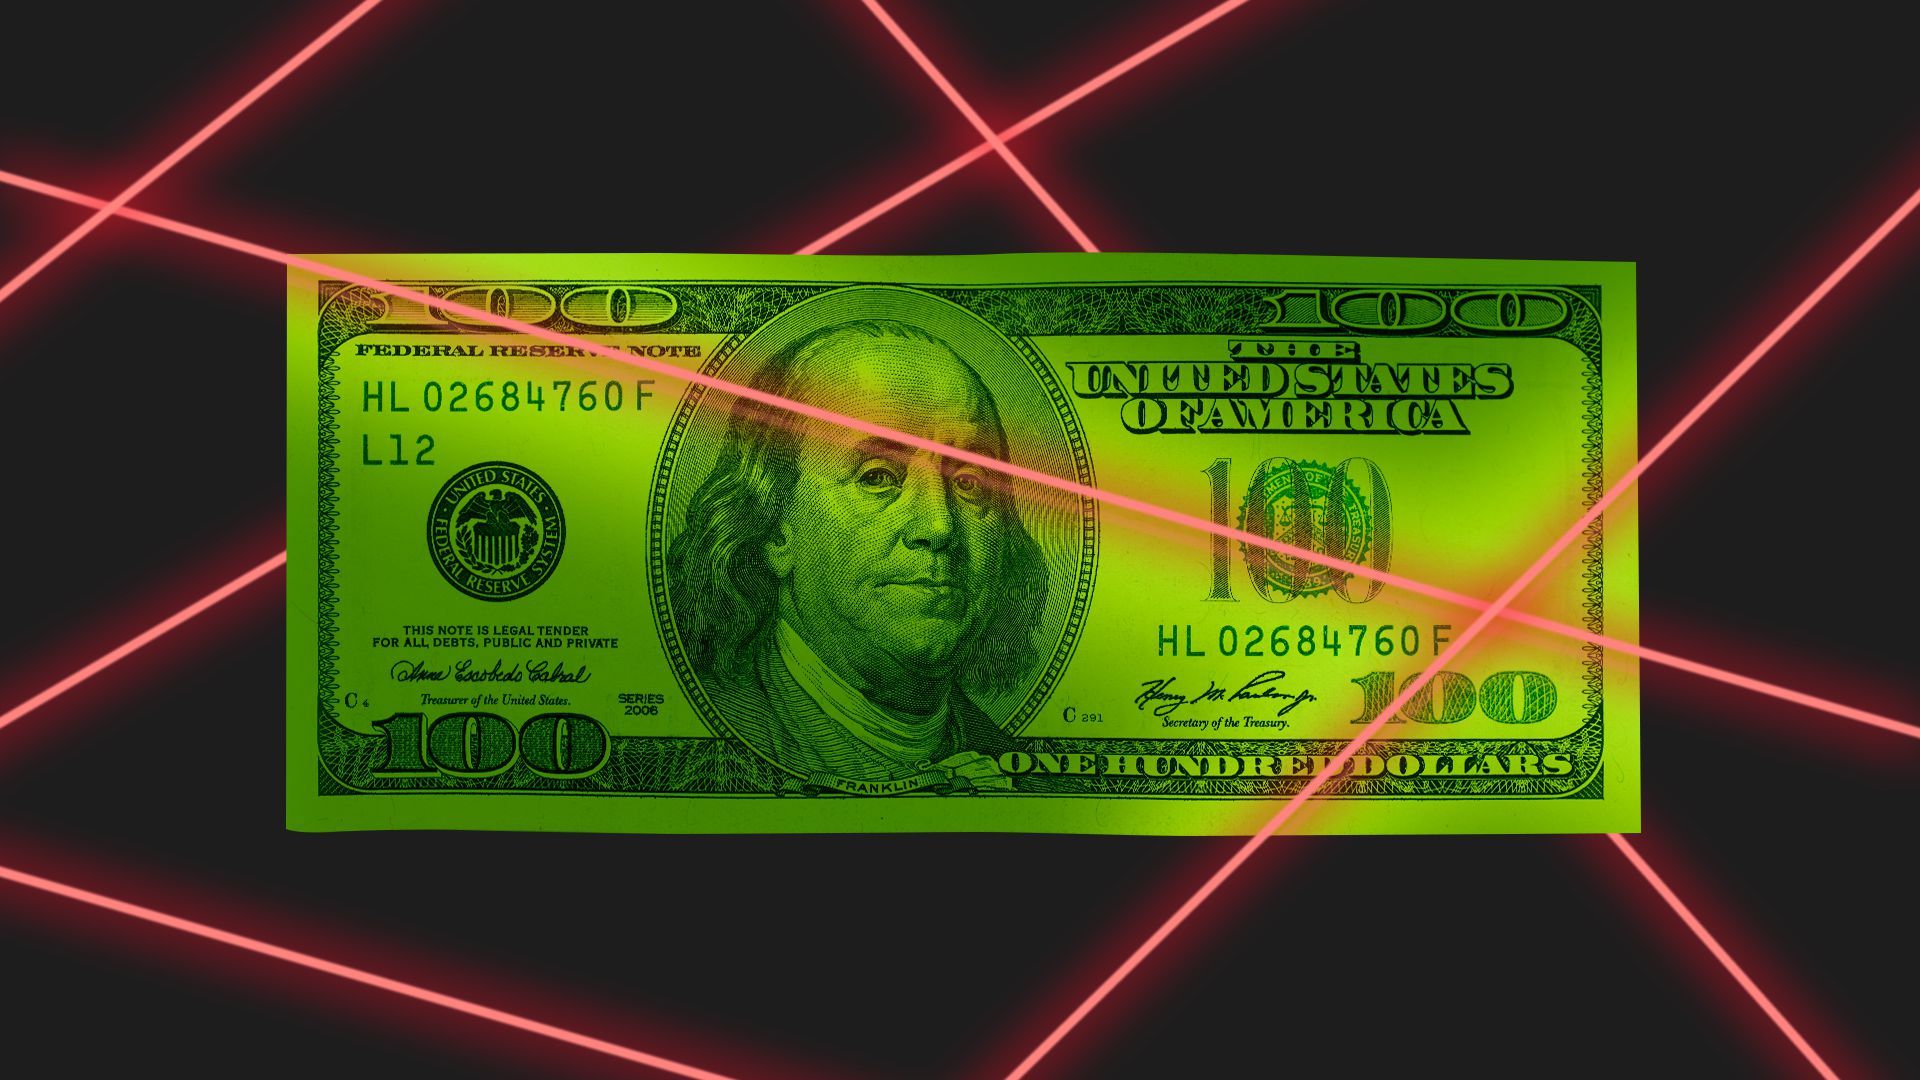 Illustration of a hundred dollar bill surrounded by lasers.  